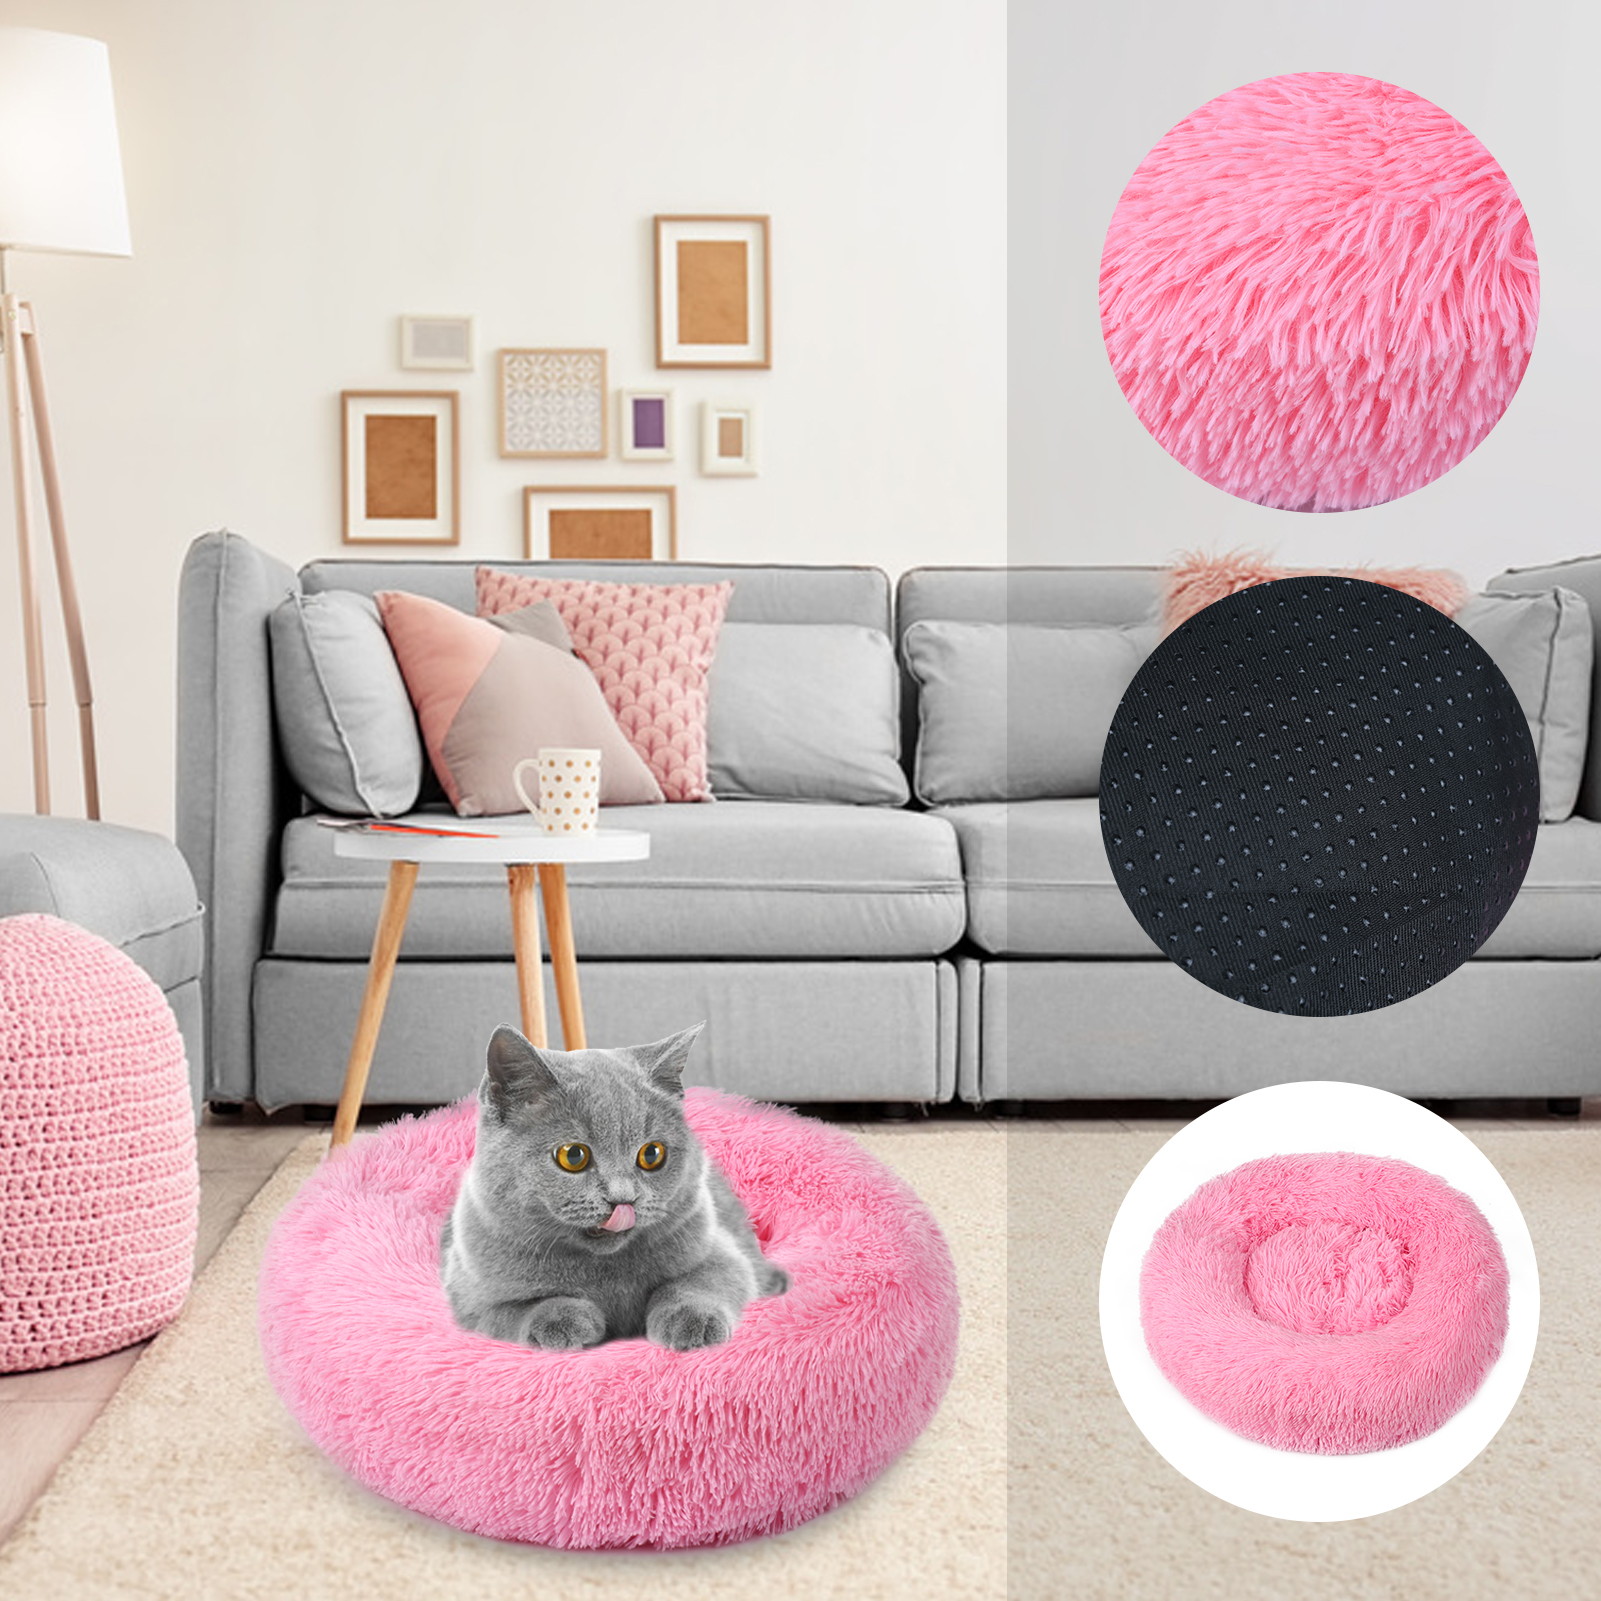 Fluffy Dog Wool Bed Soft Plush Cat Bed Round Pet Cat Nest Pillow Self-warming Snooze Sleeping Pets Cushion for Home Pet Bed Mat